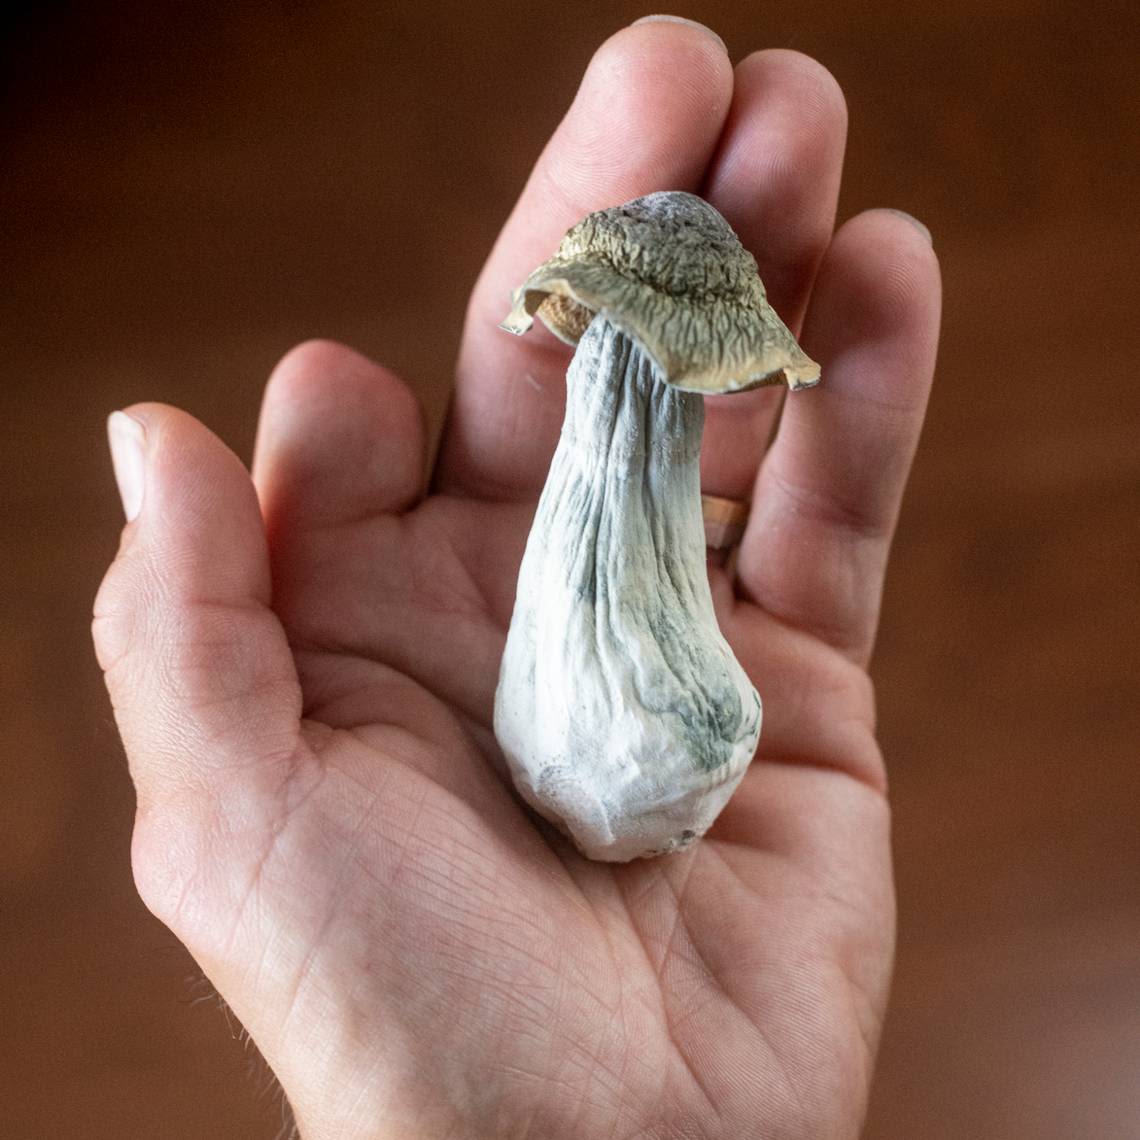 California GOP lawmaker flips on psychedelics, introduces bill to allow limited usage